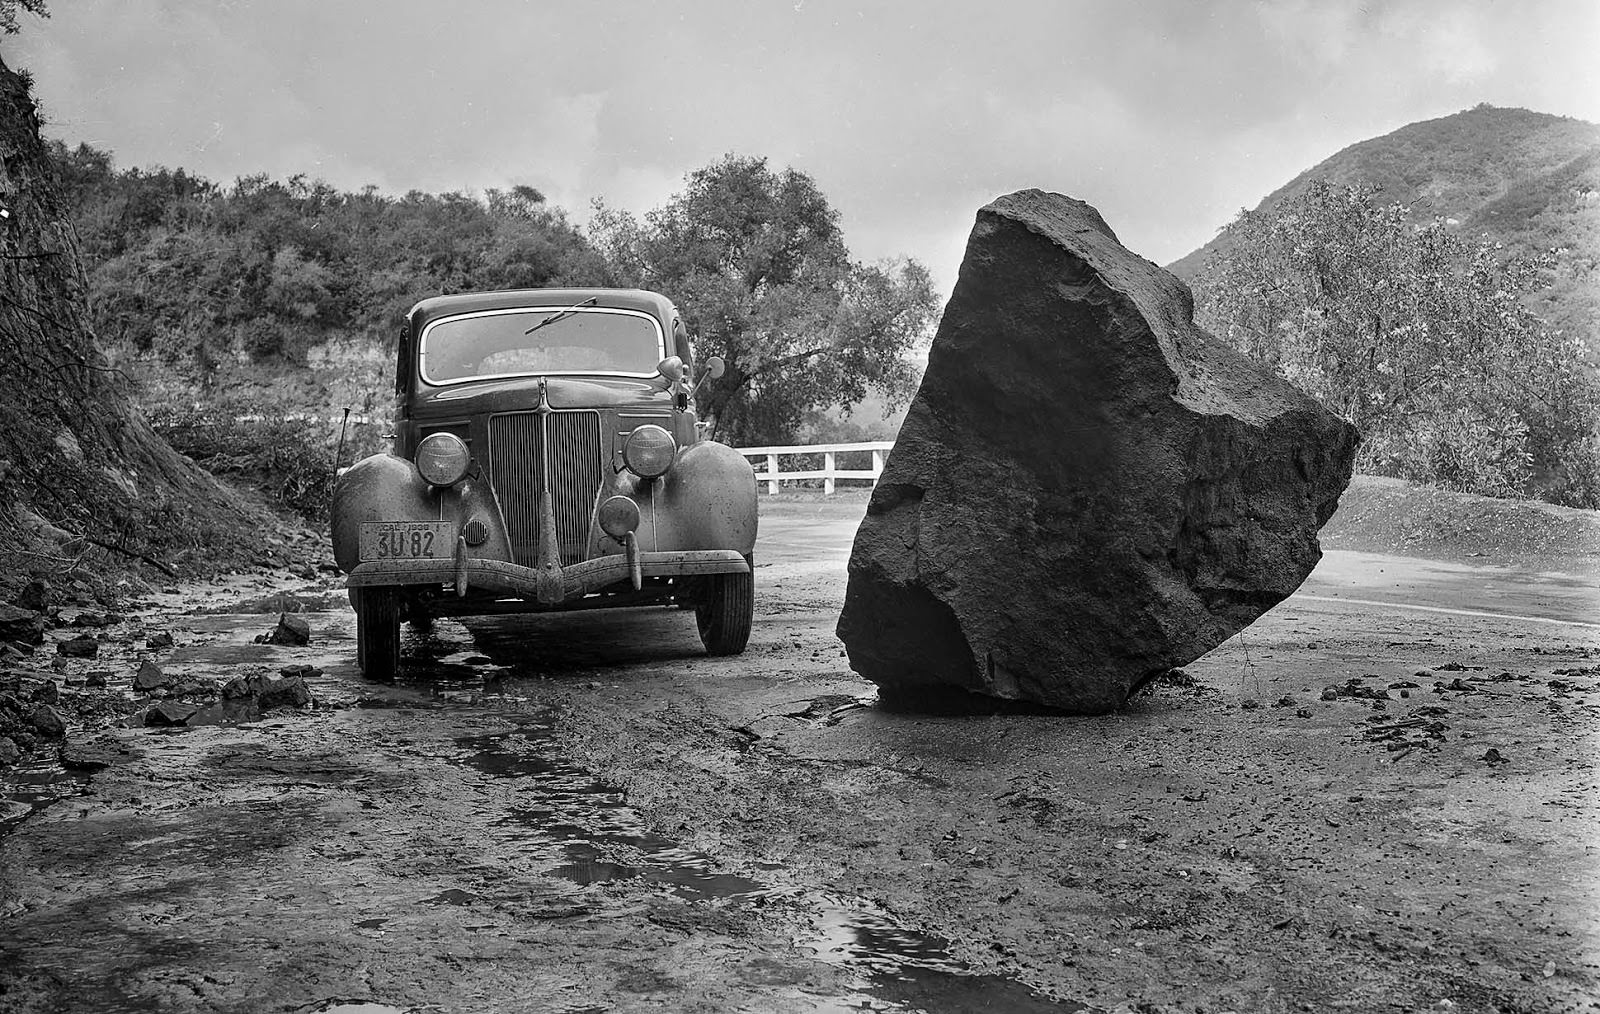 A boulder on a road after a rainstorm on March 1, 1938.